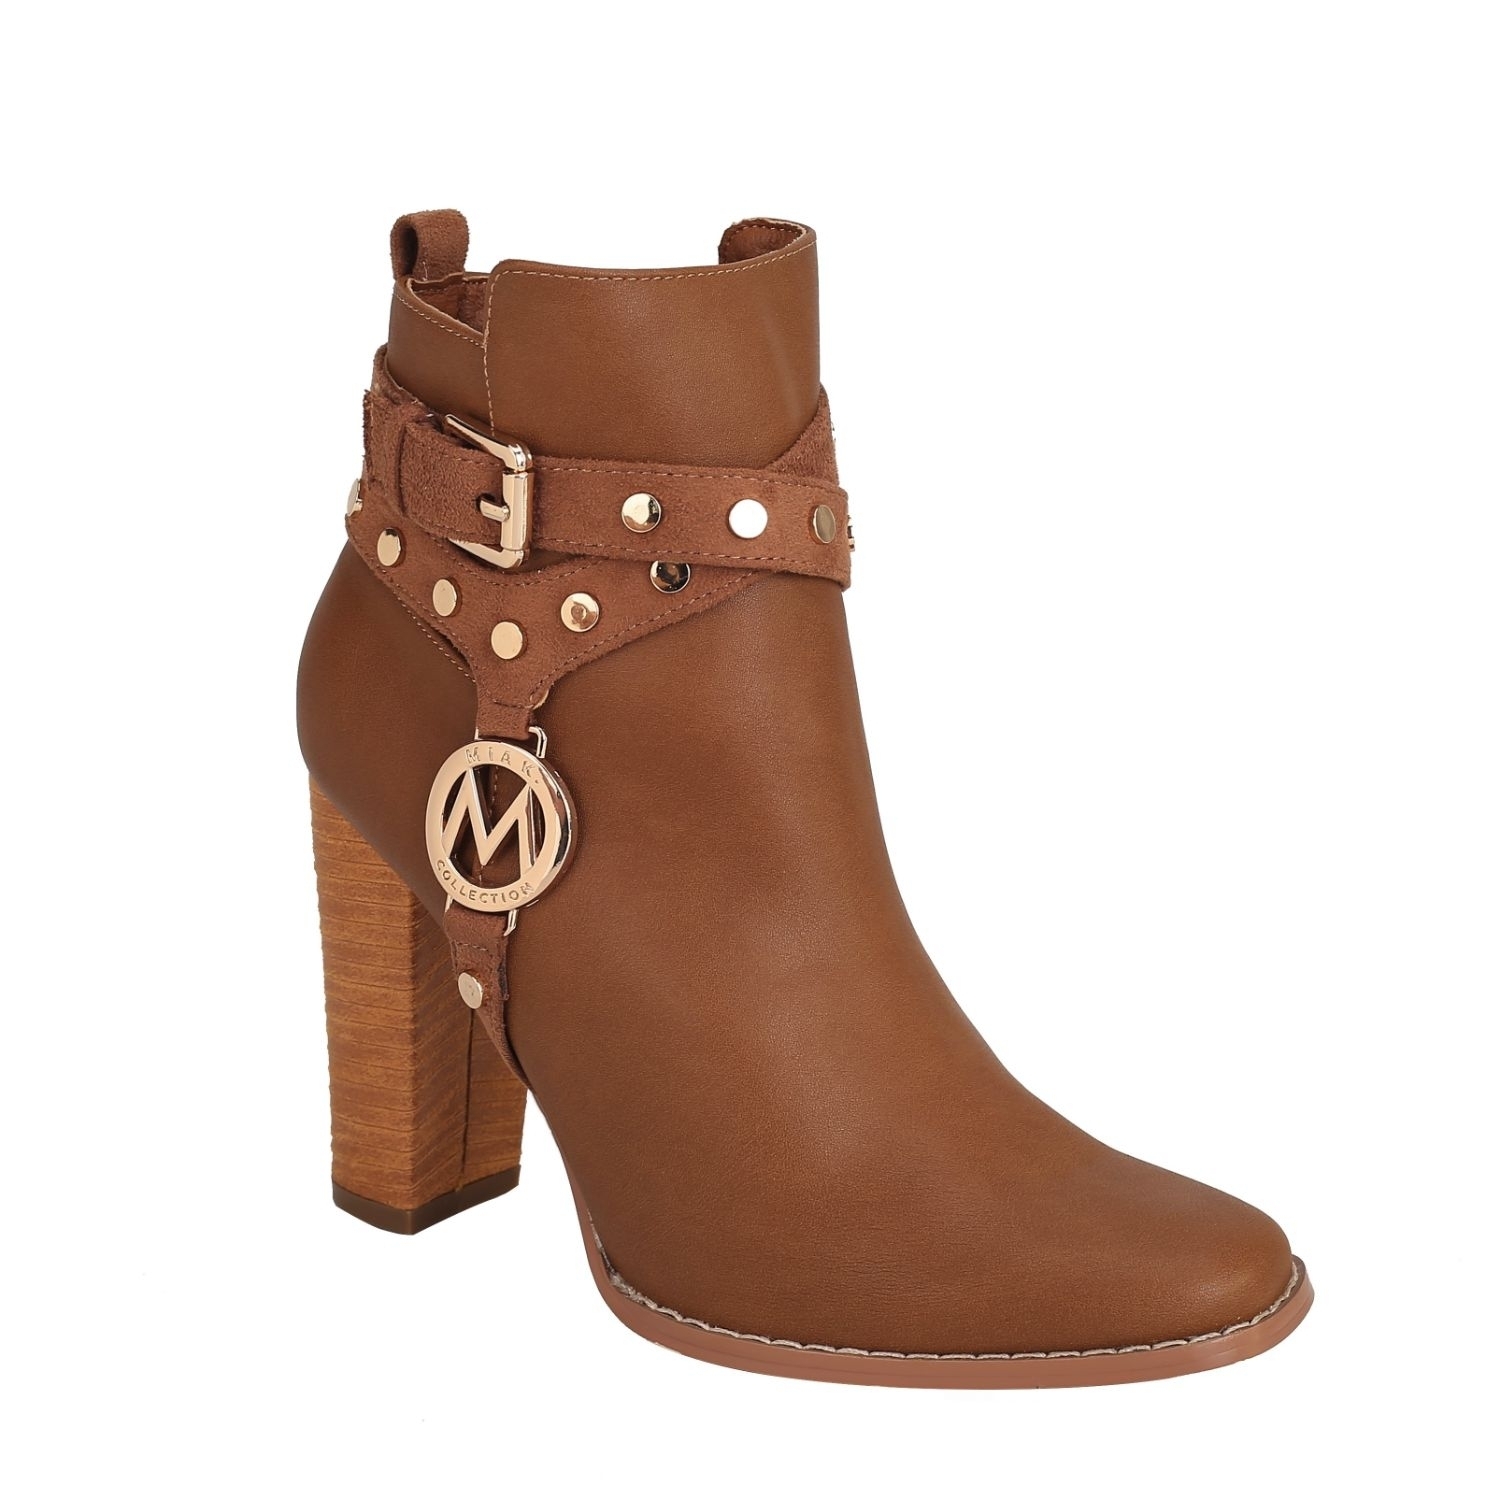 MKF Collection Brooke Ankle Women's Boot With Wide Heel By Mia K - Cognac-9